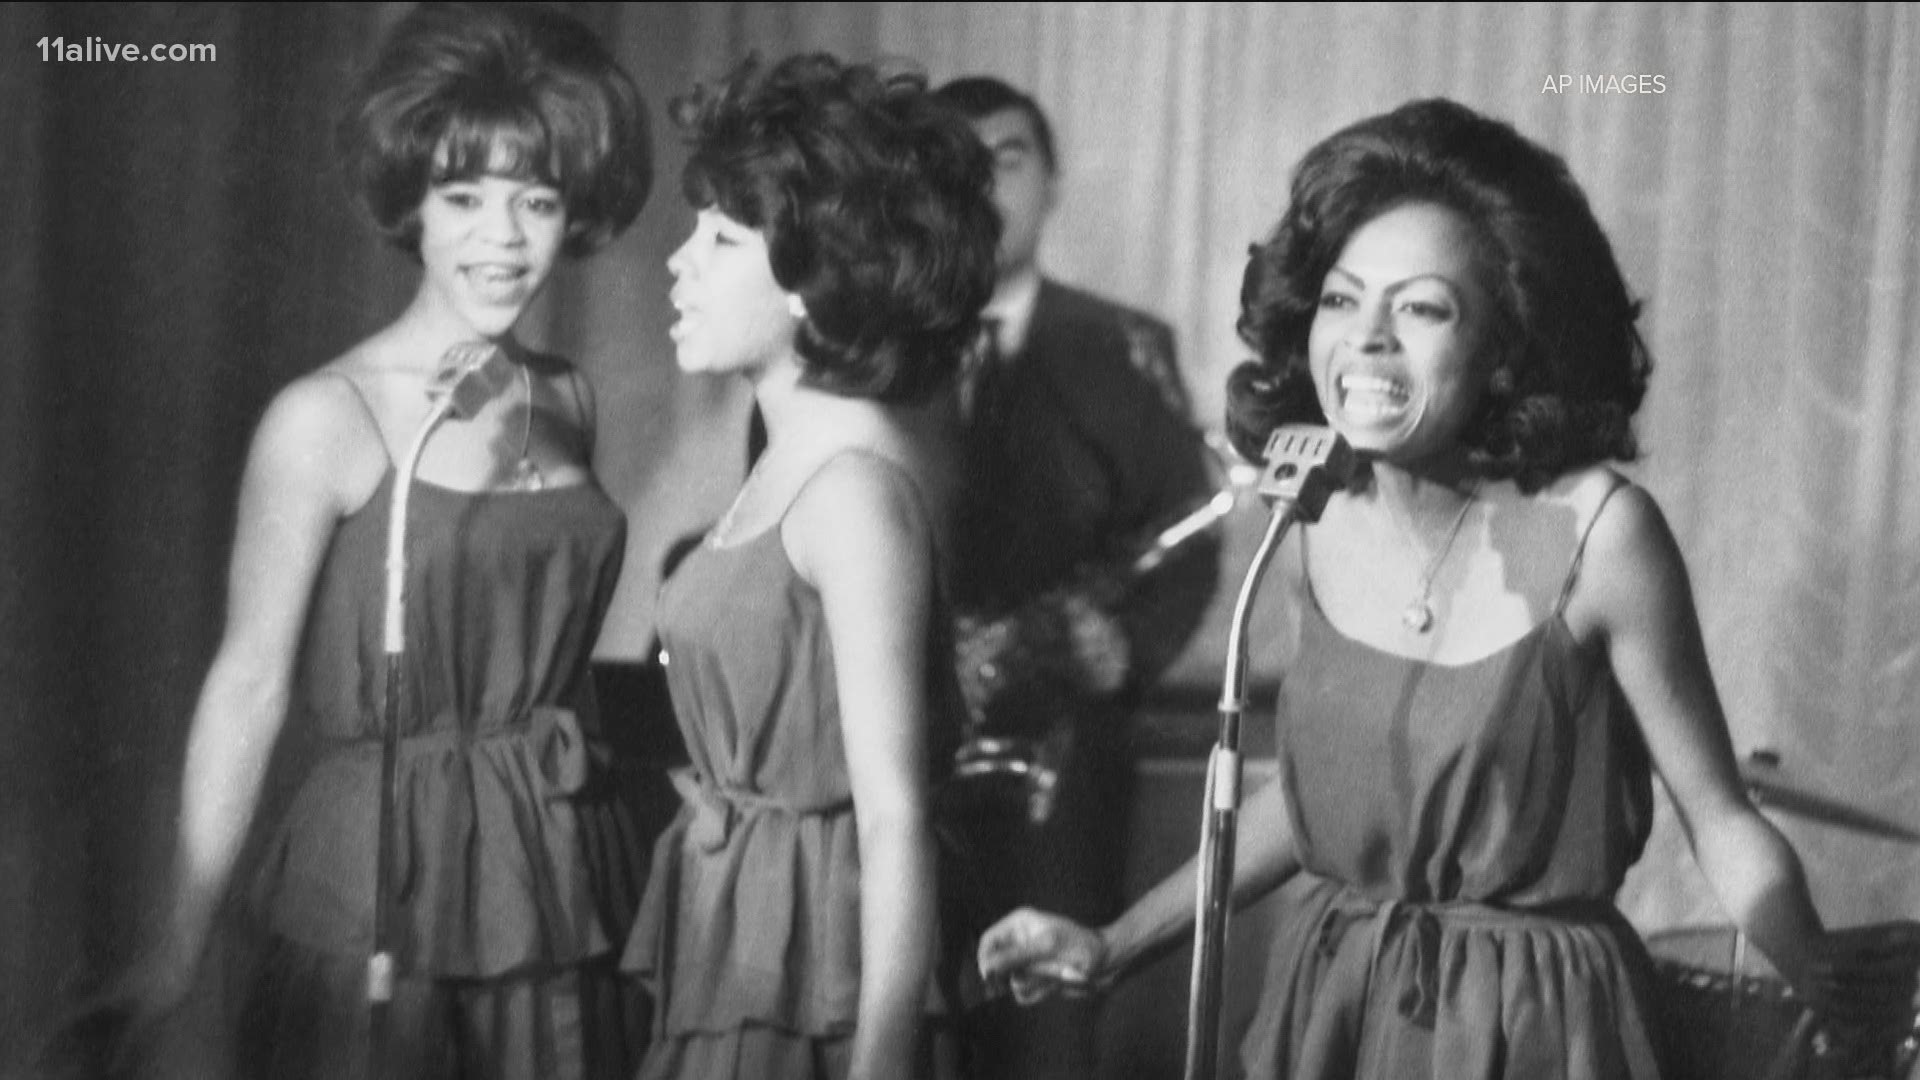 Wilson was one of the first members of The Supremes, which formed in Detroit in 1959.